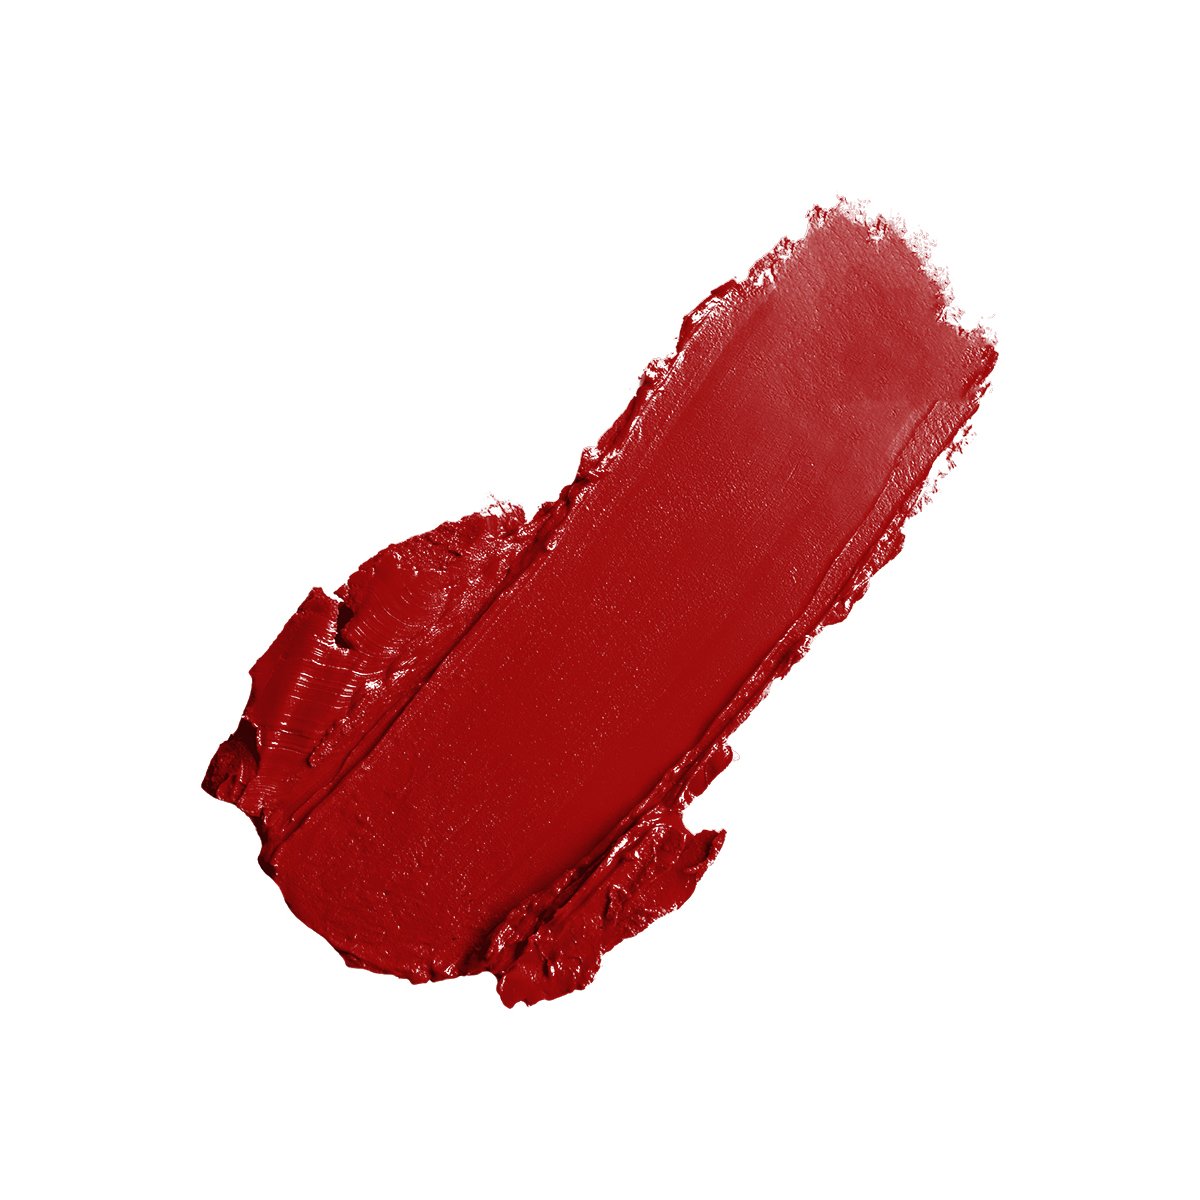 NOTE LONG WEARING LIPSTICK - 12 NOTE BOMB - Halal Lipstick, Cruelty Free Lipstick, Paraben Free Lipstick, Vegan Lipstick, Lipstick, Long Lasting, Nourishing, Hydrating, Non-Transferable 